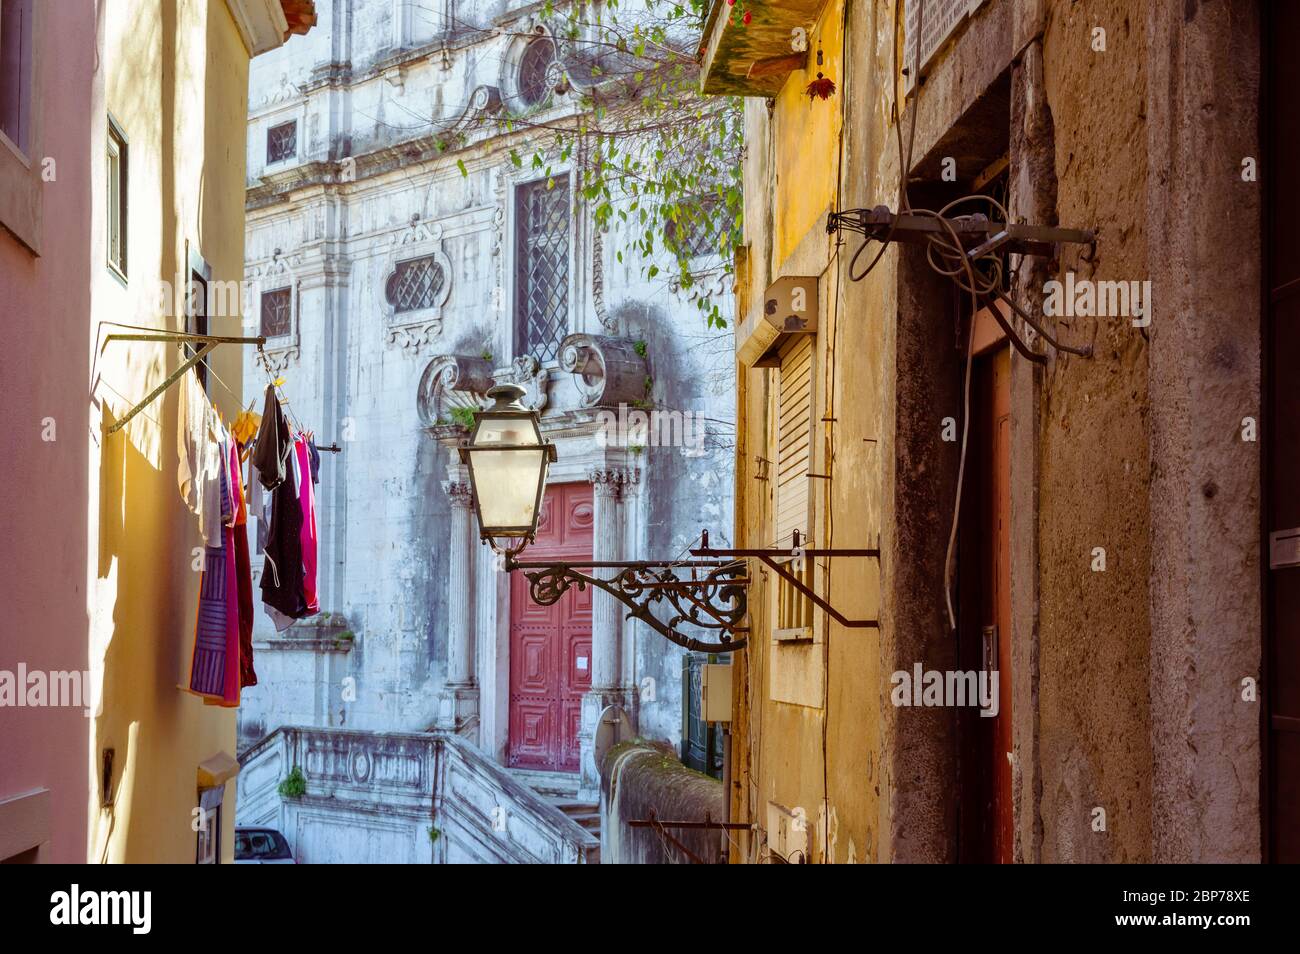 Street lamp and laundry in a picturesque narrow street of Alfama in the old town of Lisbon, Portugal Stock Photo